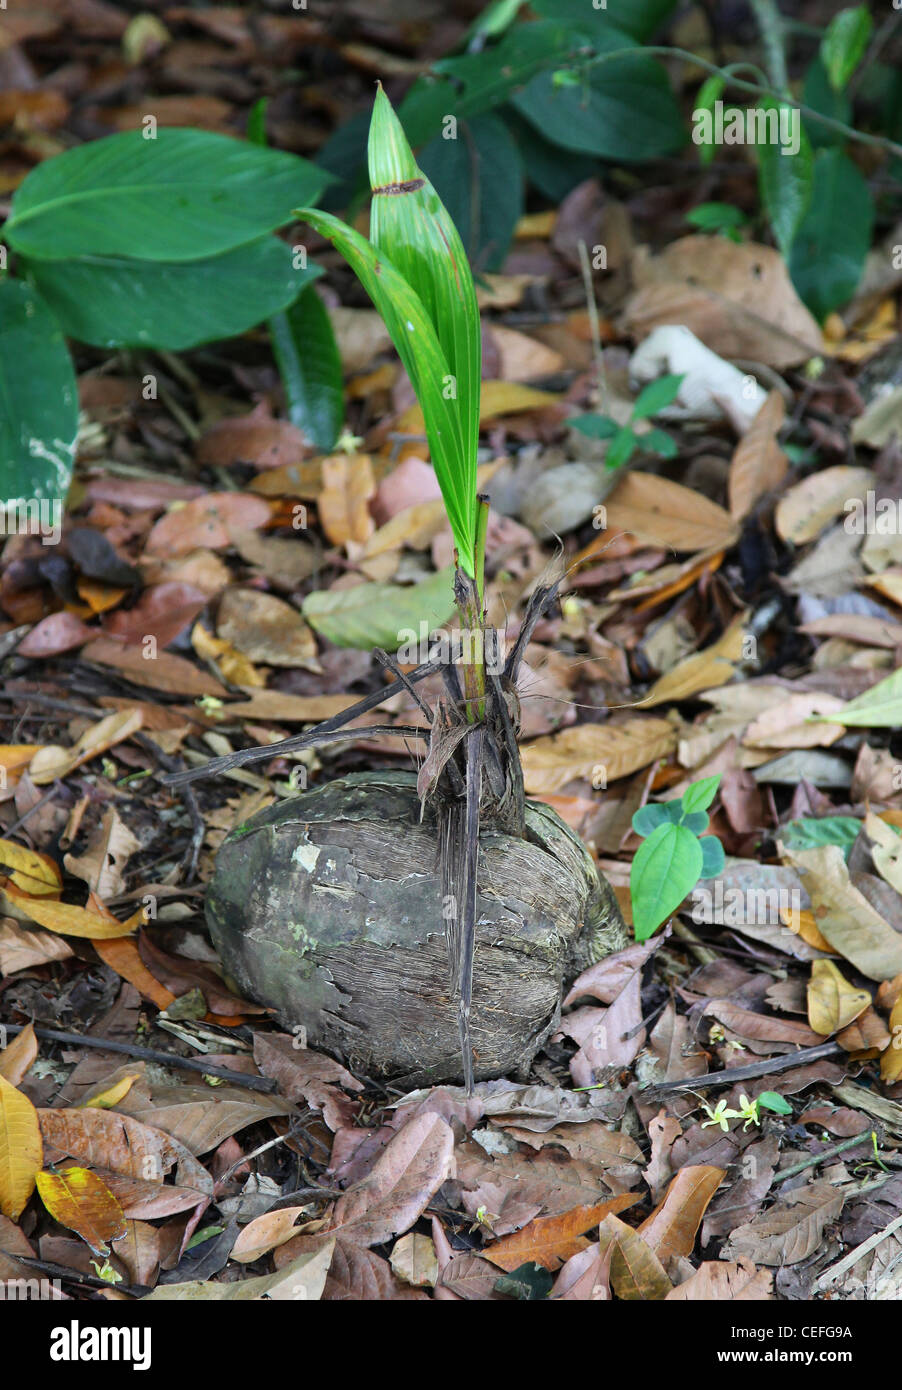 A coconut the seed or nut of the coconut palm, (Cocos nucifera) sprouting a new shoot Stock Photo